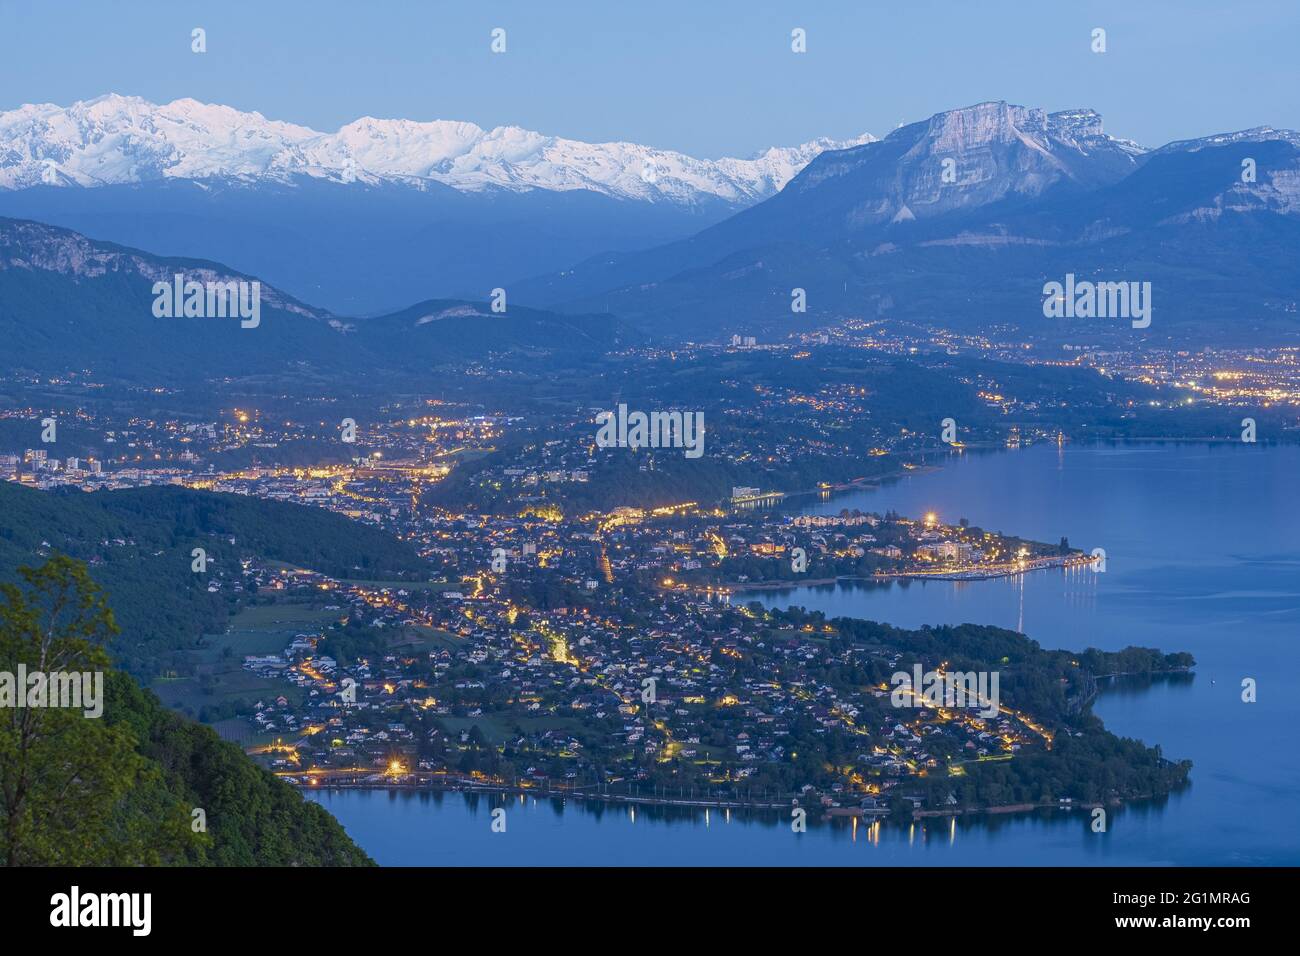 France, Savoie, Aix-les-Bains on the banks of the Bourget Lake, Mont Granier (alt : 1933m) in the Chartreuse massif and the snowy Belledonne massif in the background Stock Photo